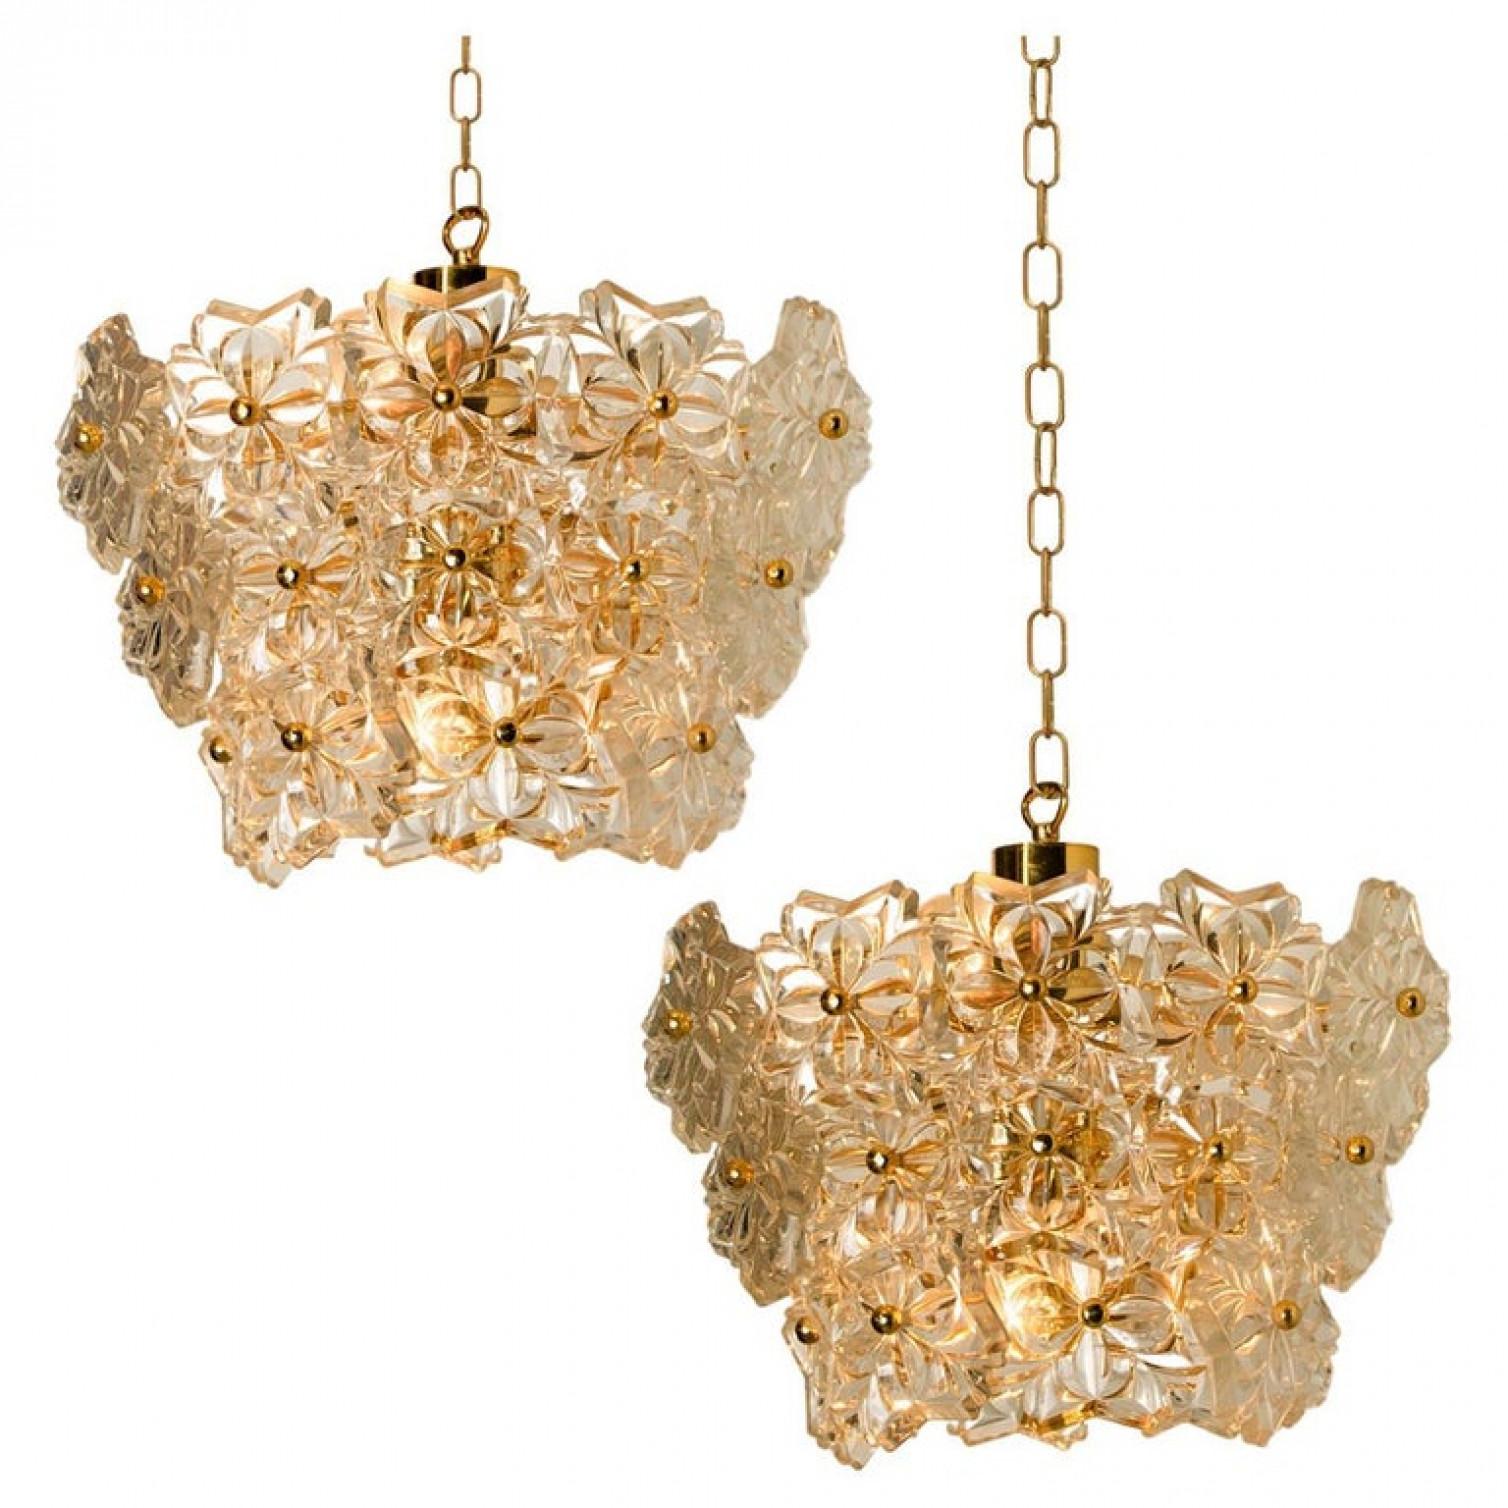 These sculptural chandeliers with a design of a bouquet of textured glass flowers and are from the historical lighting company Hillebrand,. Manufactured in midcentury, circa 1970 (late 1960s or early 1970s).

The fixture has several flower shaped